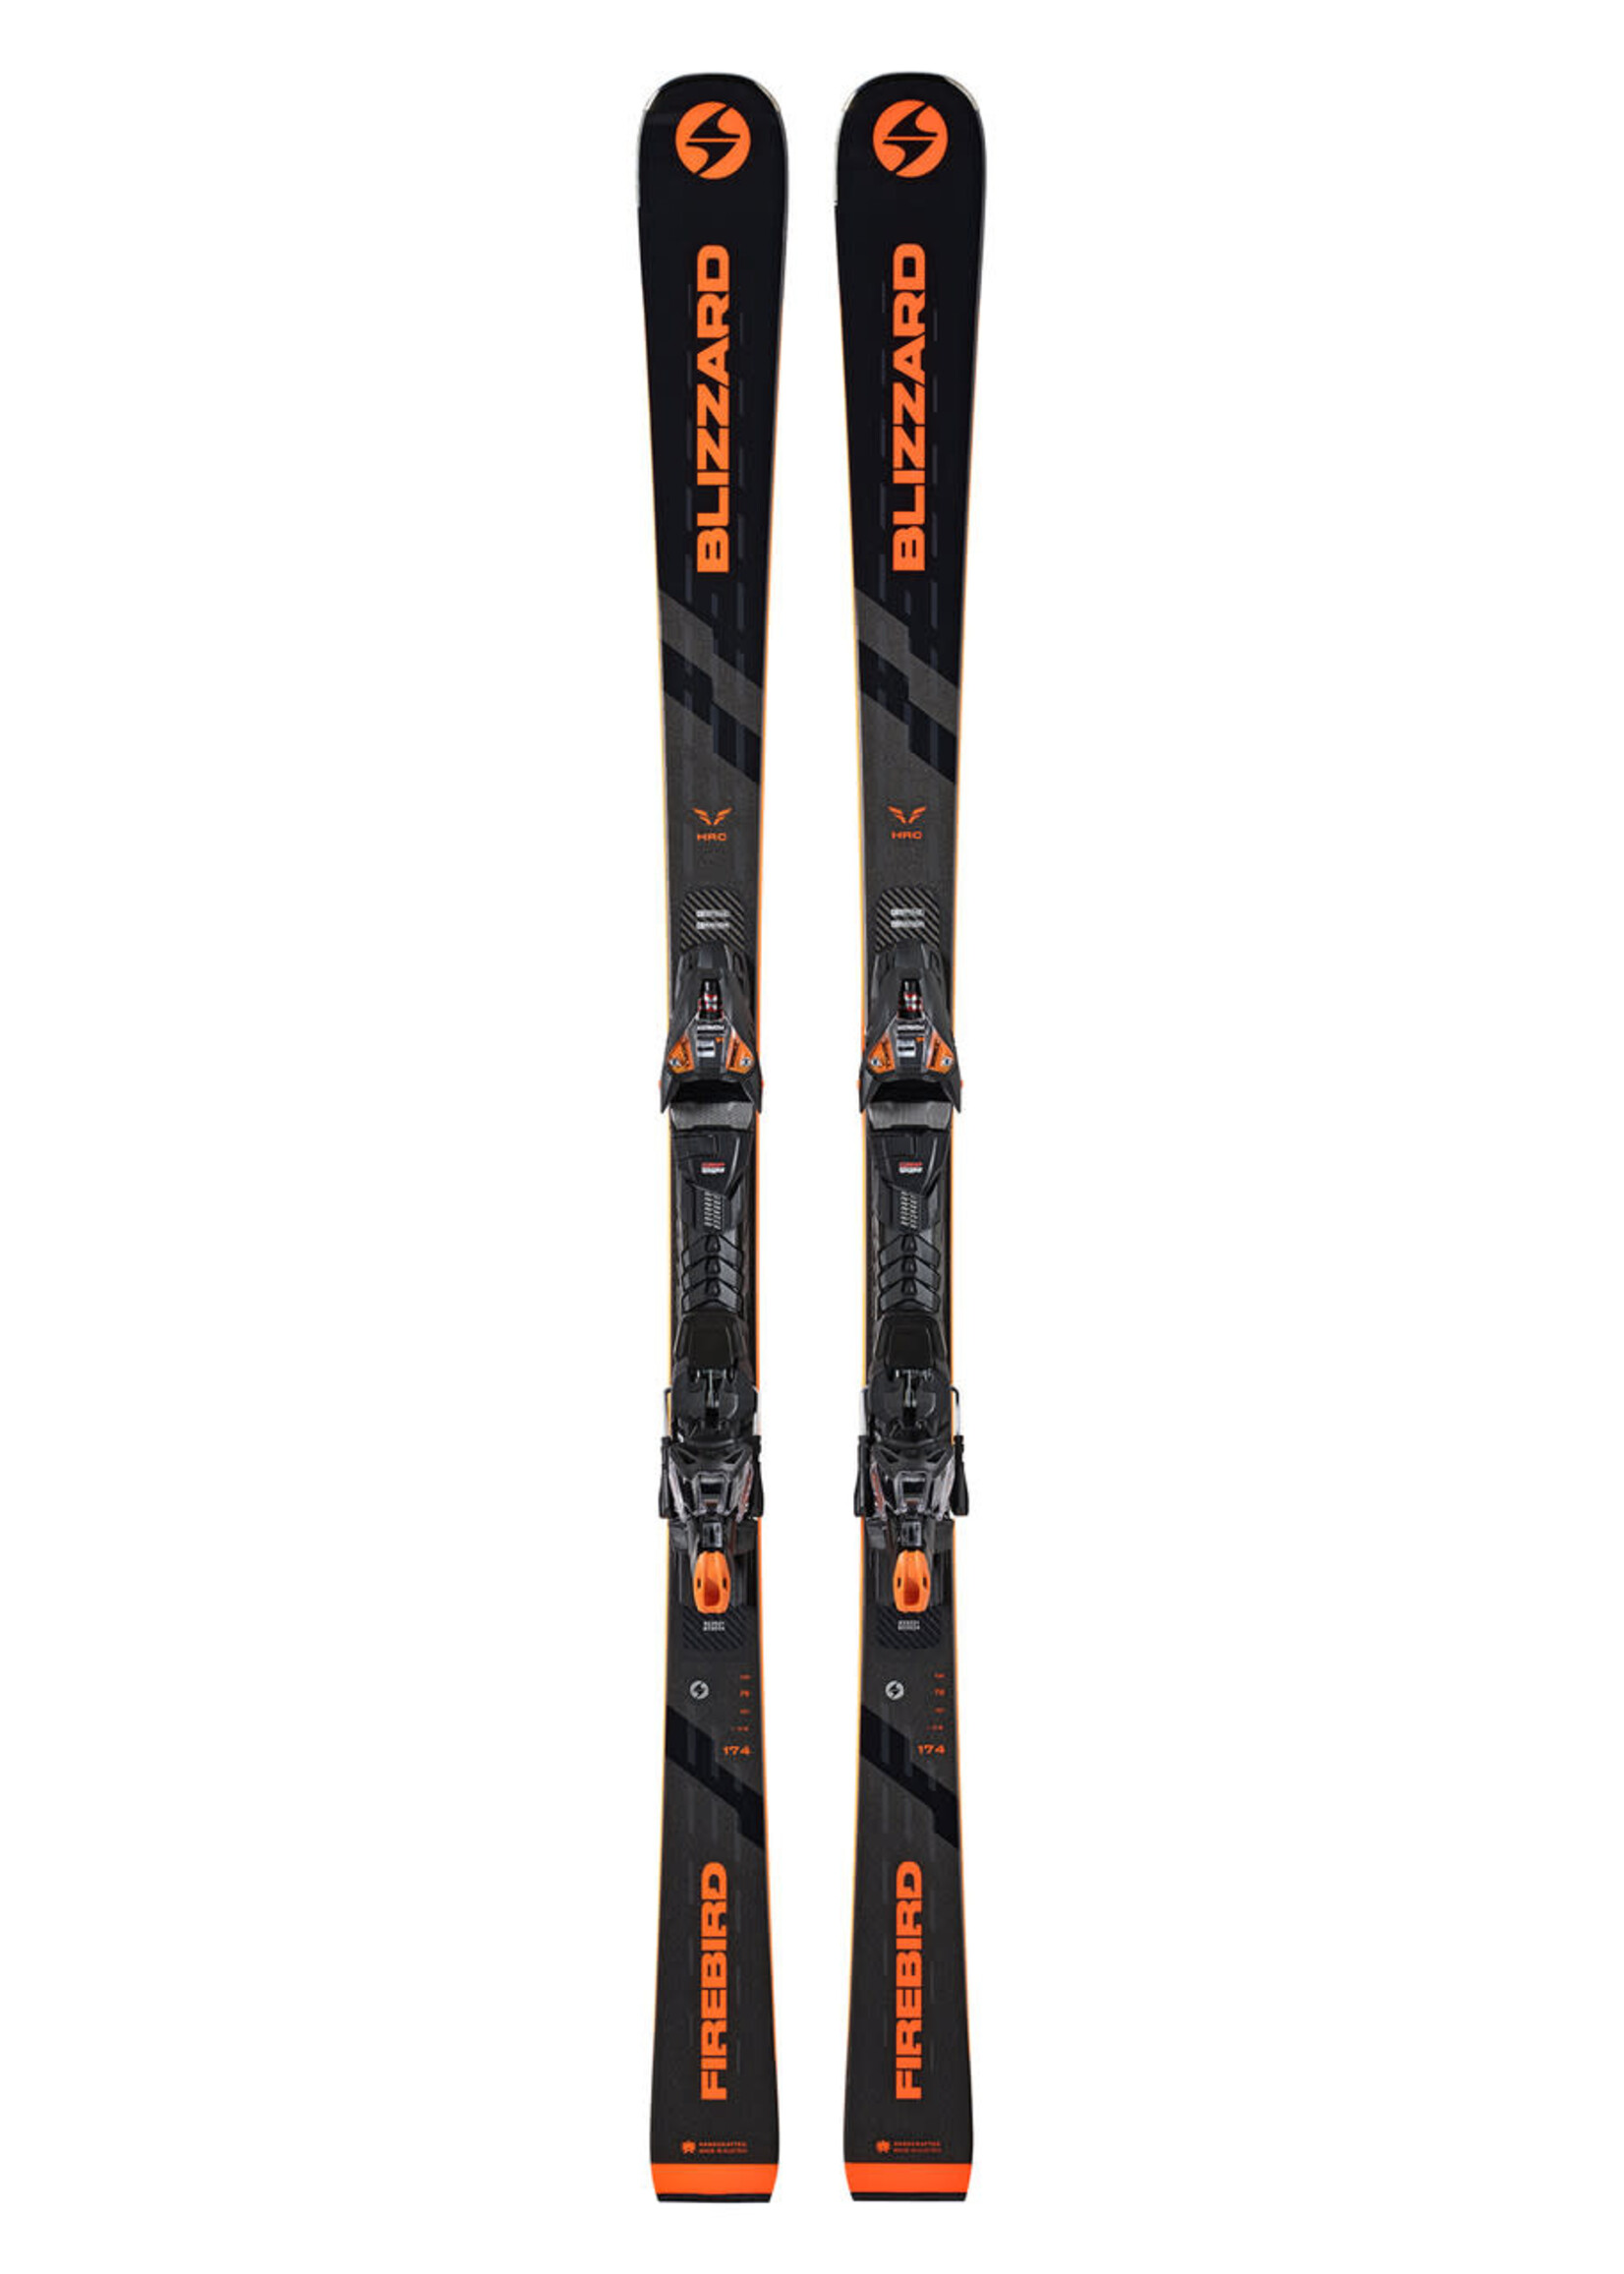 BLIZZARD BLIZZARD FIREBIRD HRC SKIS with Bindings xCELL